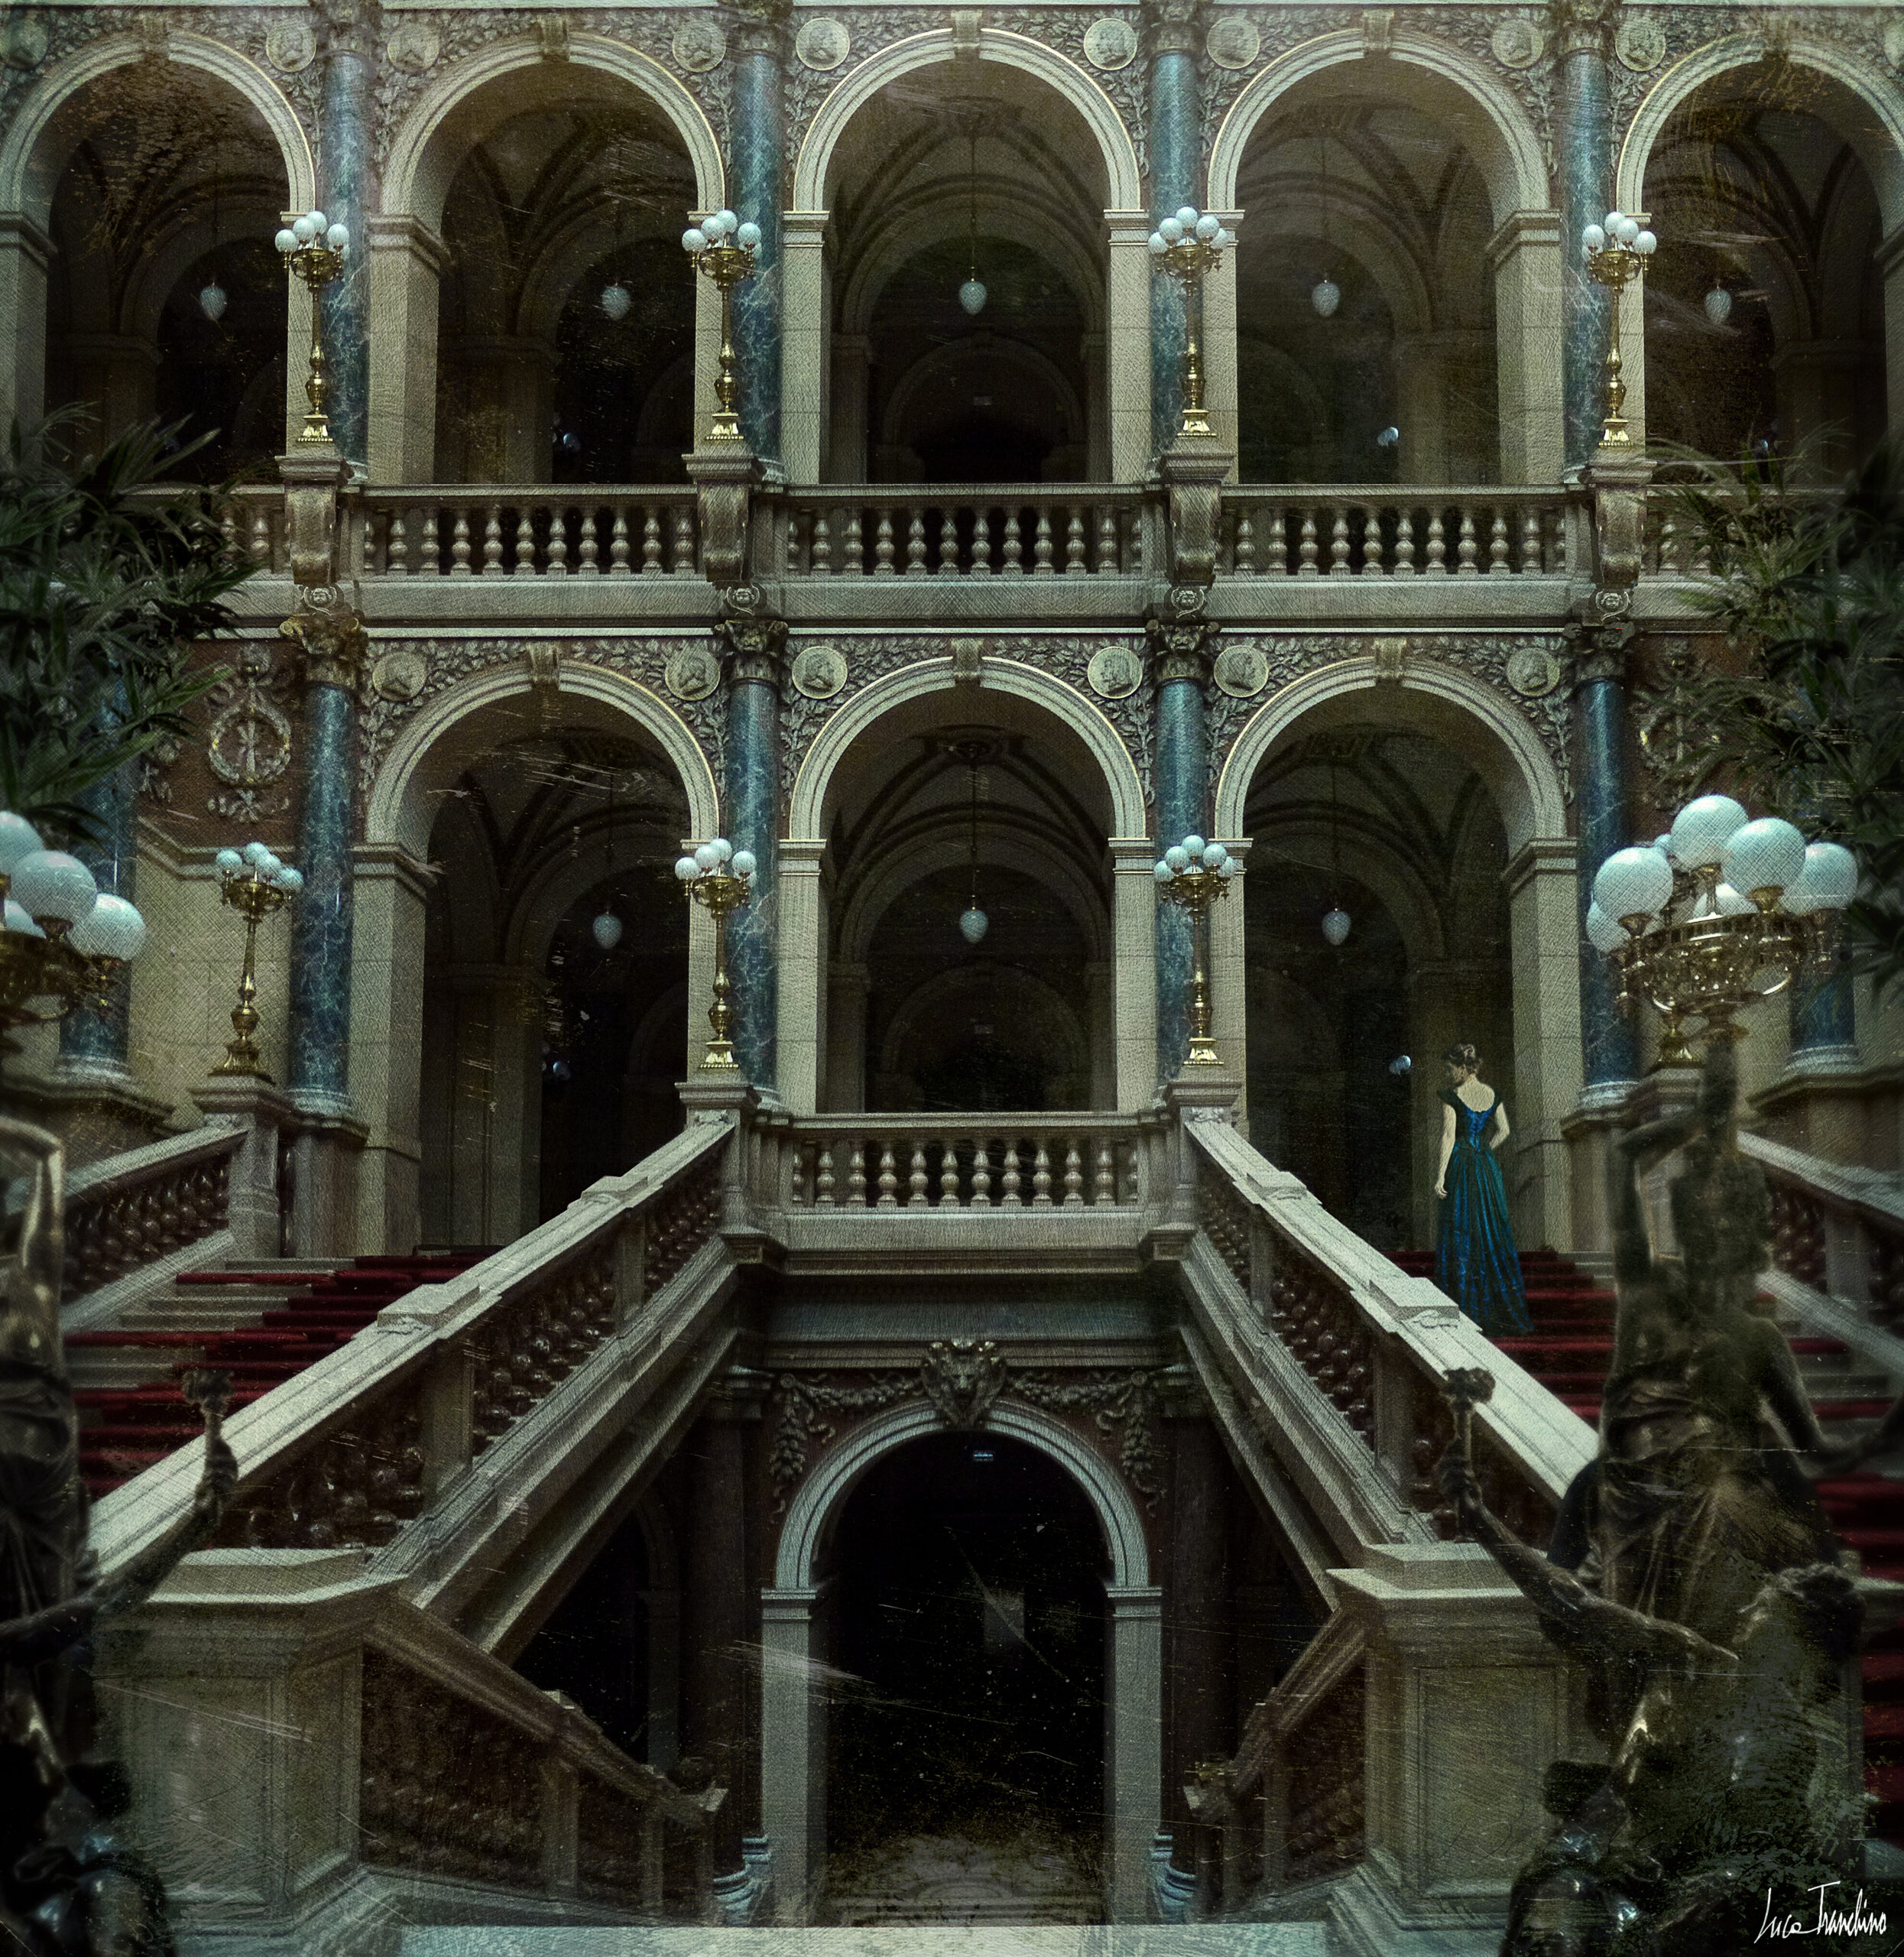 “Int. Staircase”, Concept Art by Luca Tranchino - ©2020 - Mixed Media